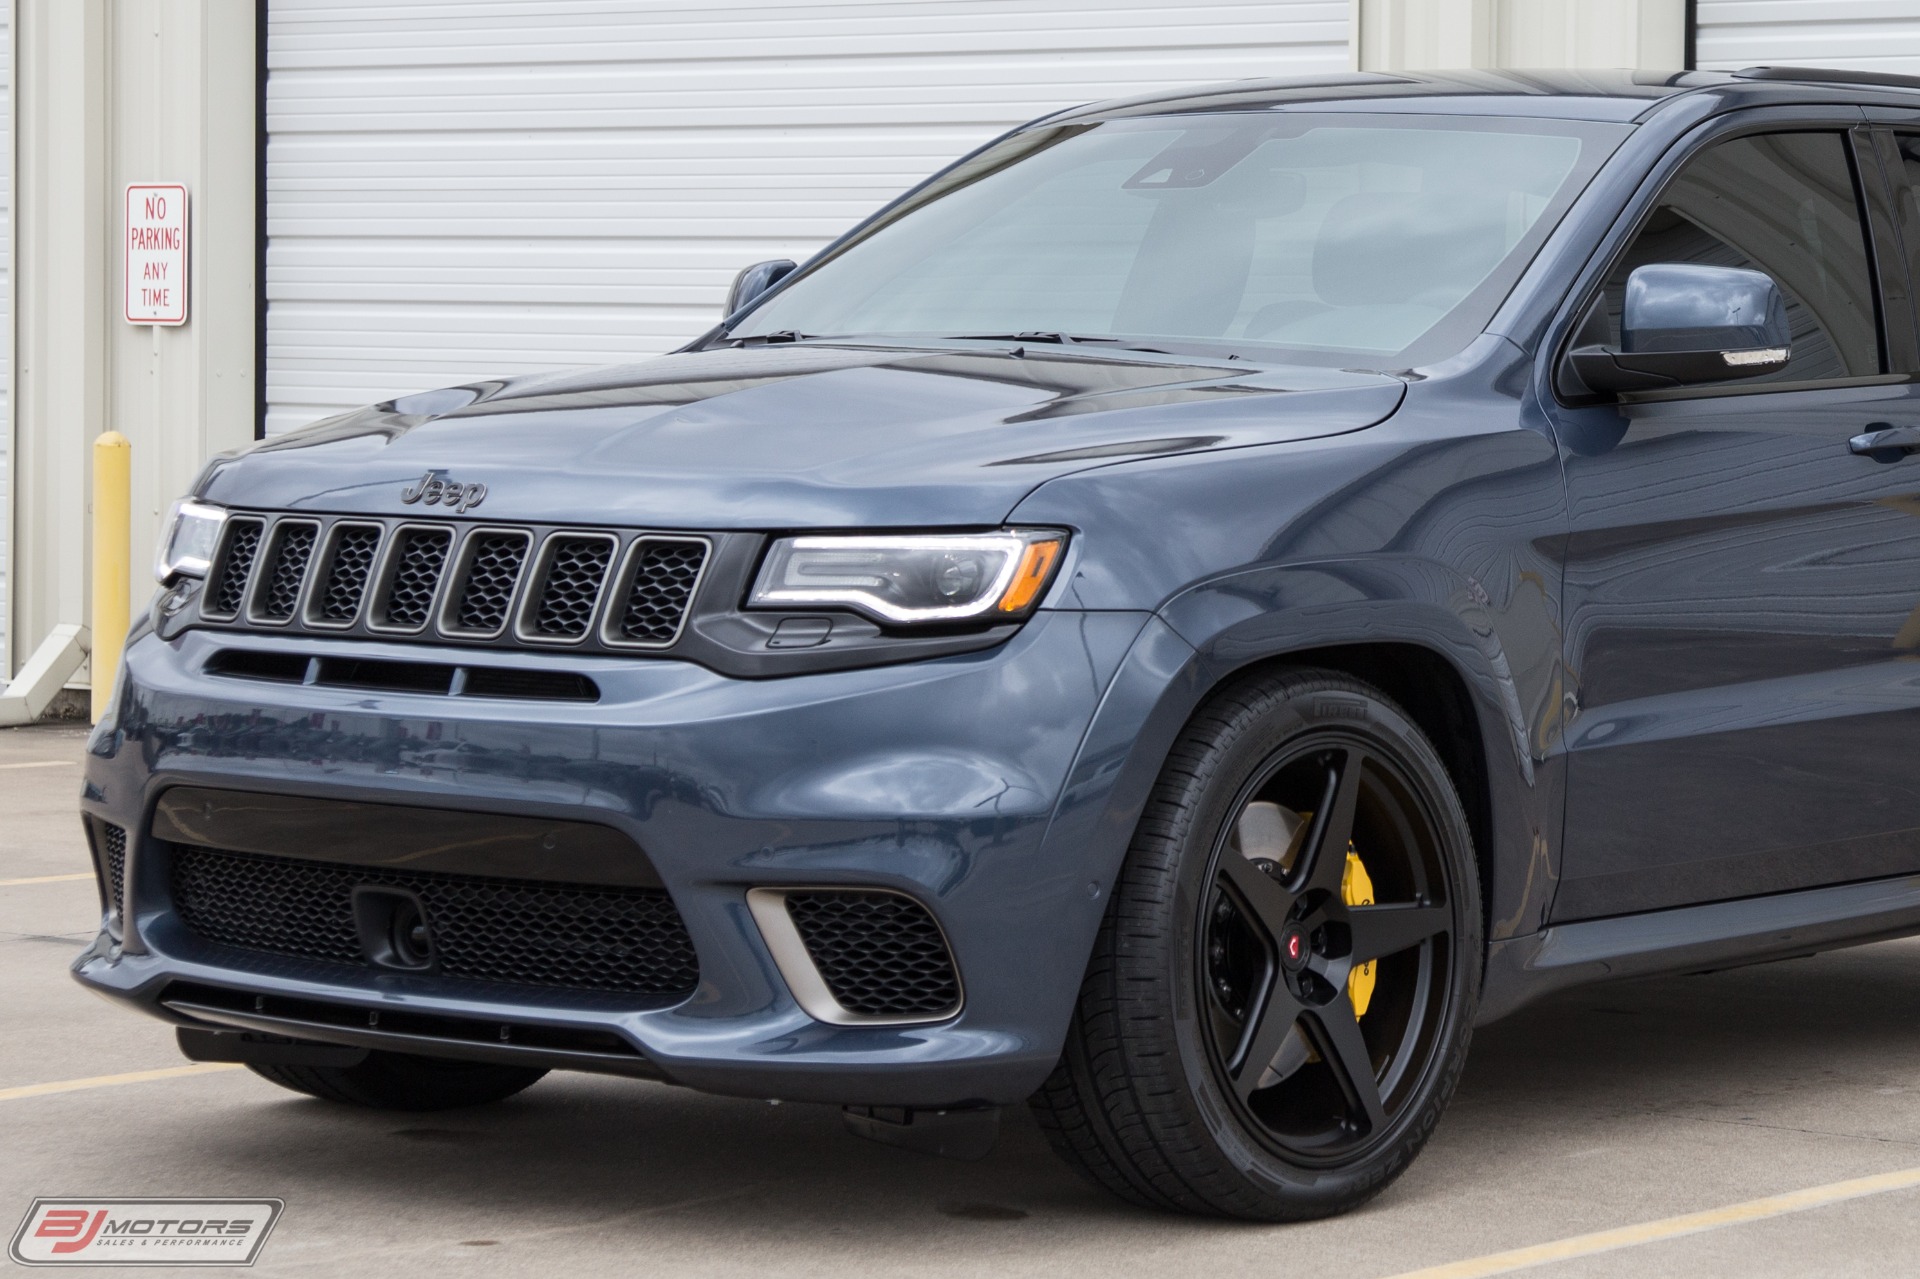 2021 Jeep Grand Cherokee Trackhawk Interior Dimensions: Seating, Cargo  Space & Trunk Size - Photos | CarBuzz